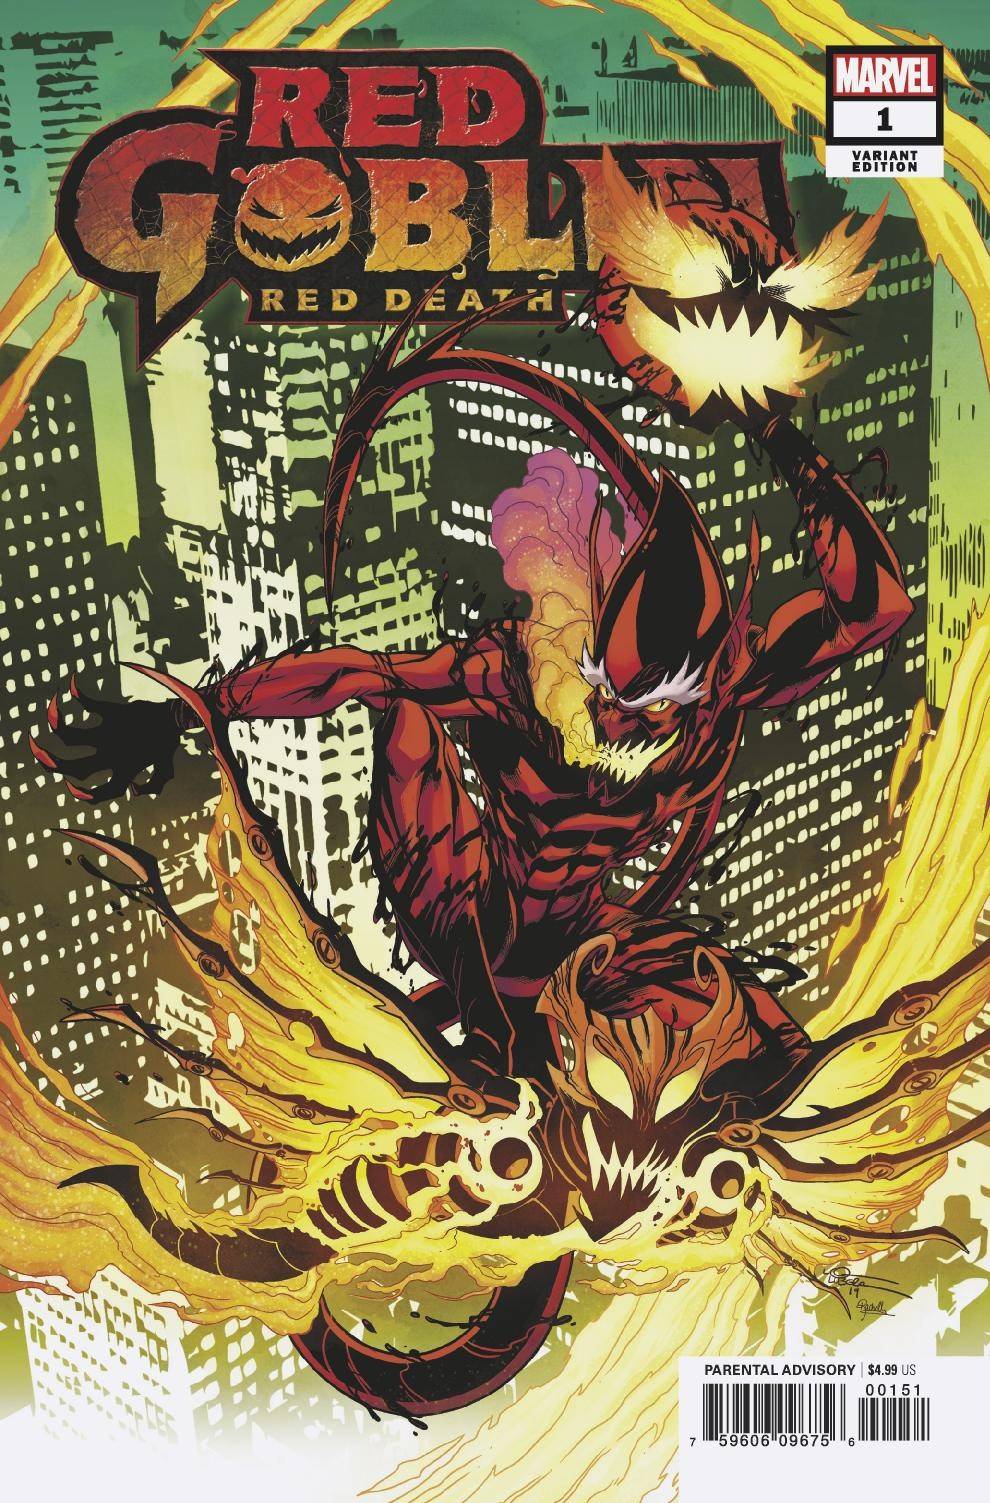 Red Goblin Red Death #1 Lubera Variant